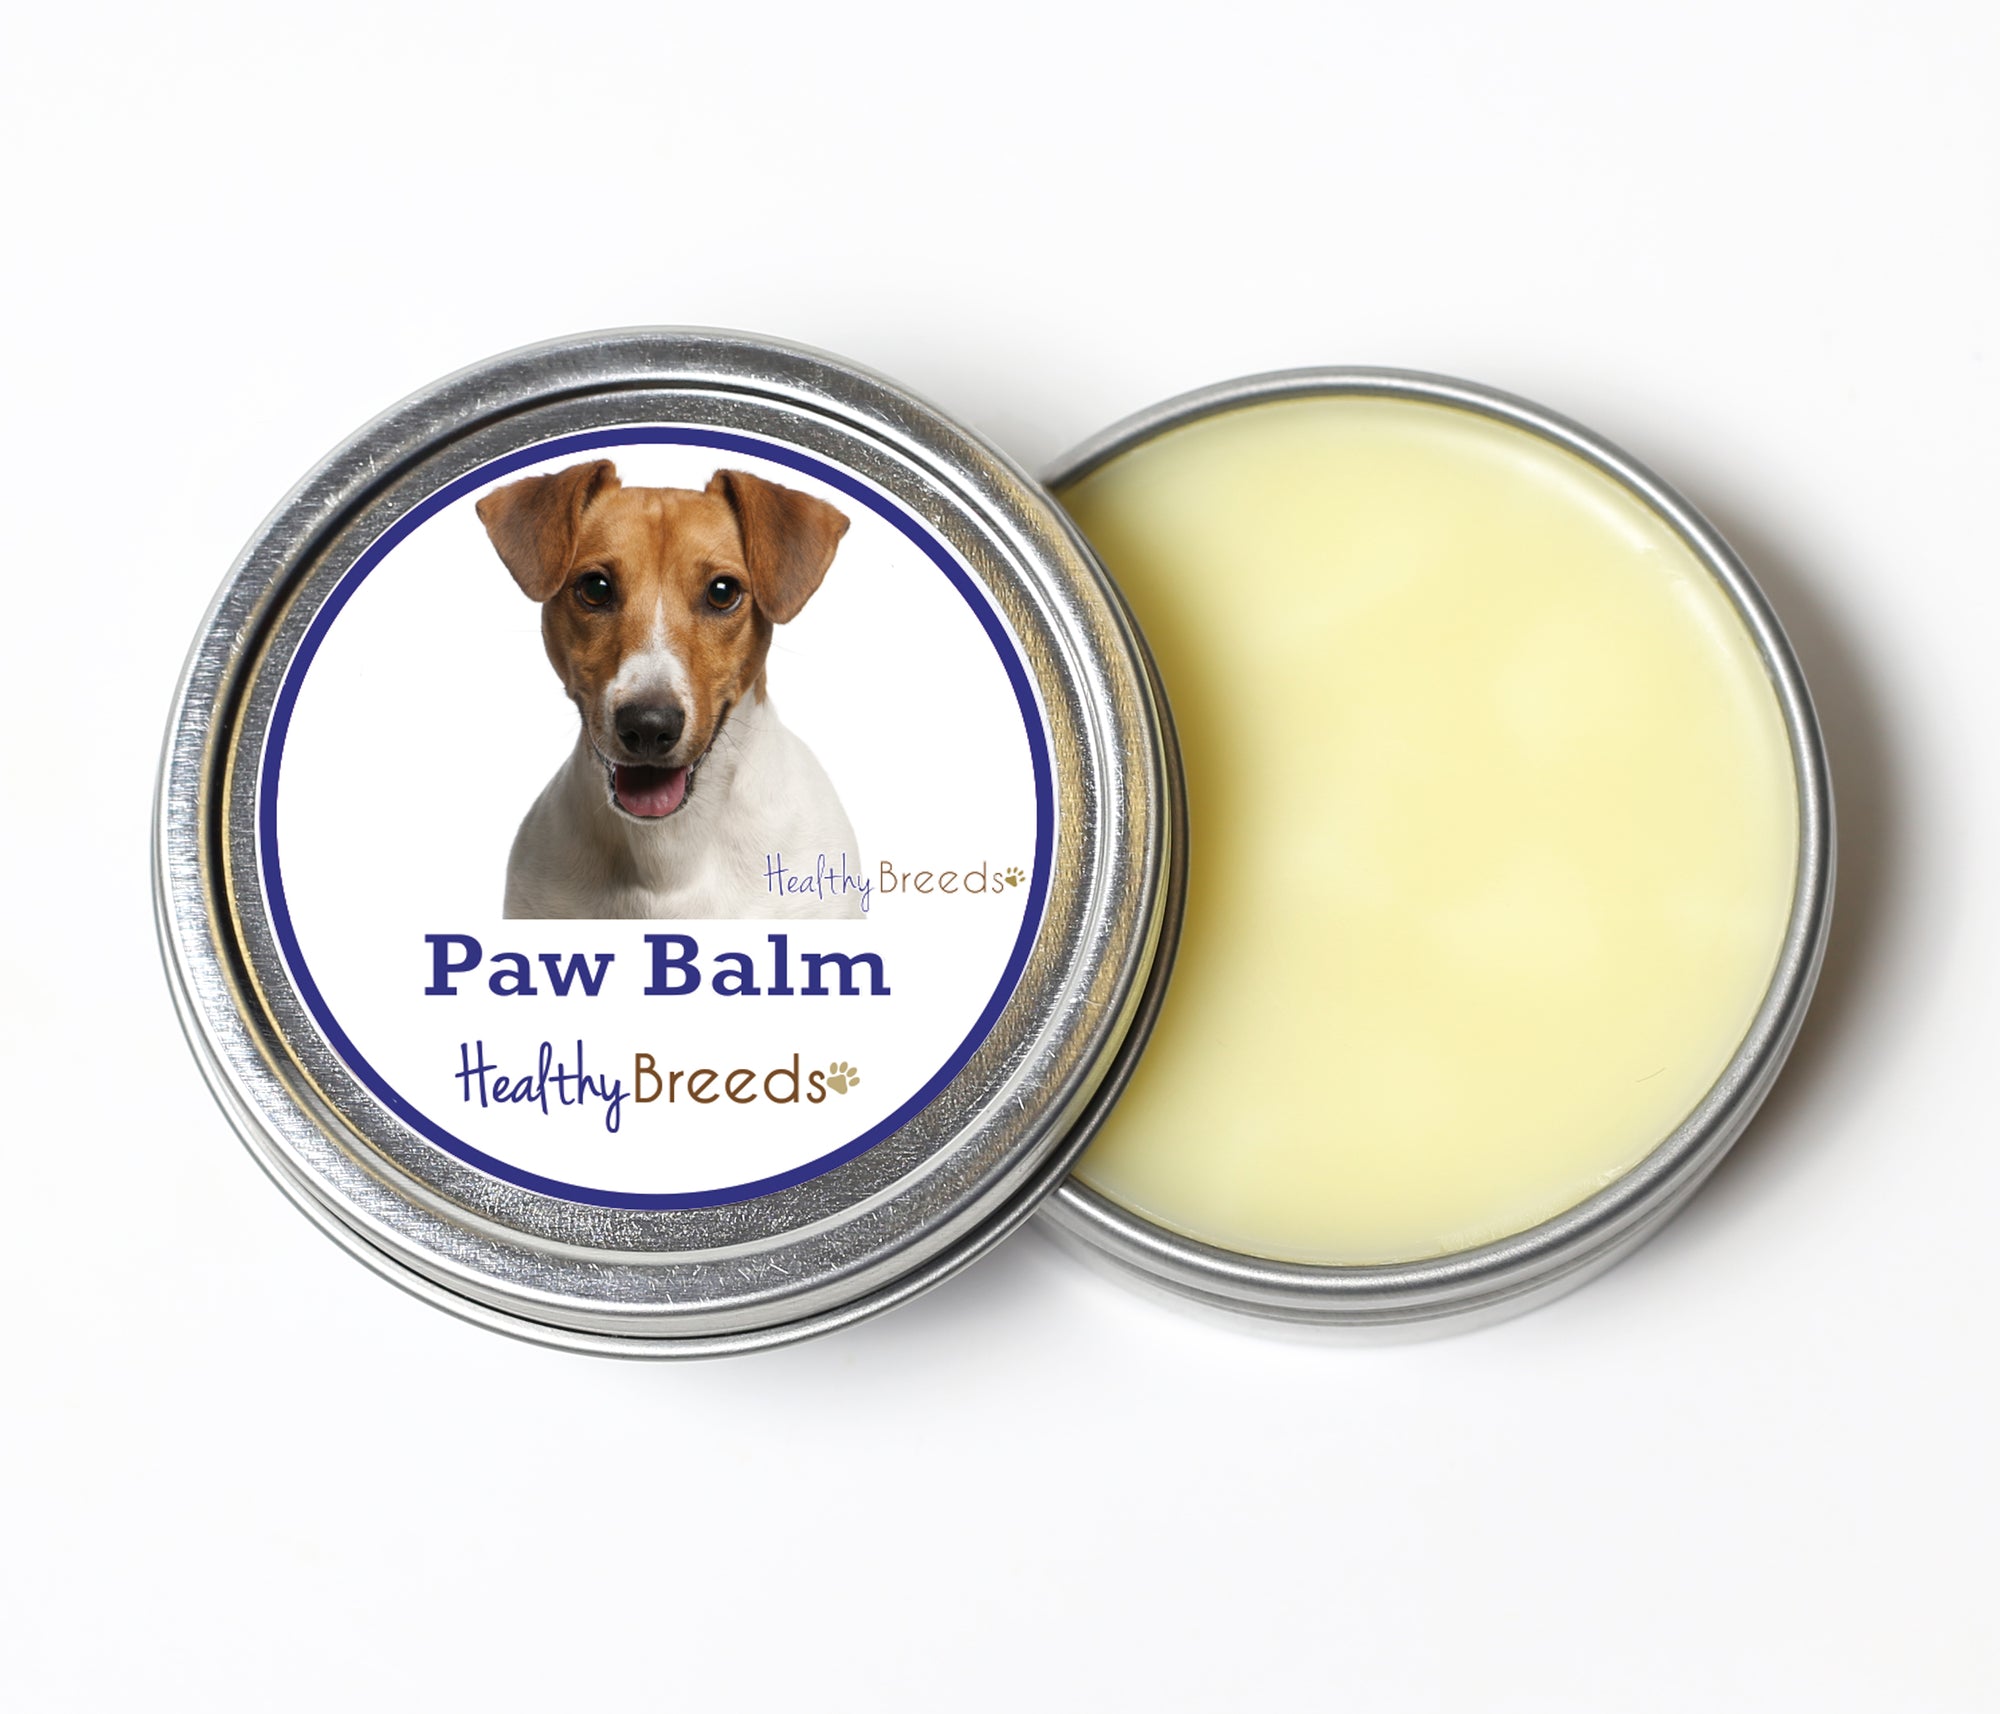 Healthy Breeds Jack Russell Terrier Dog Paw Balm 2 oz